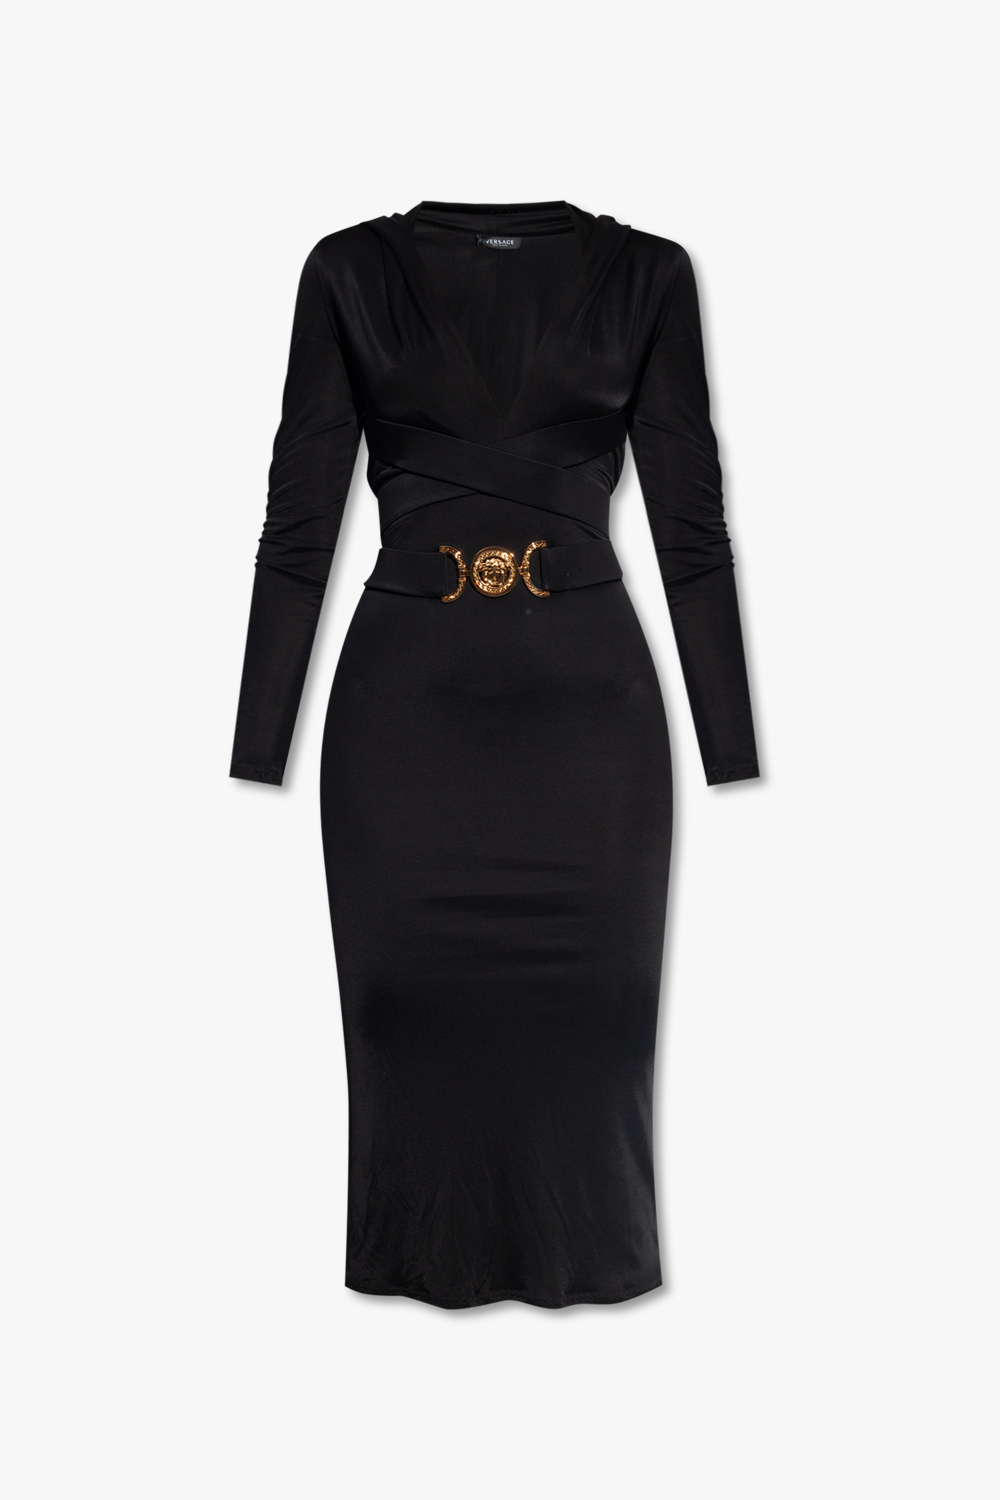 Versace Dress with logo, Women's Clothing